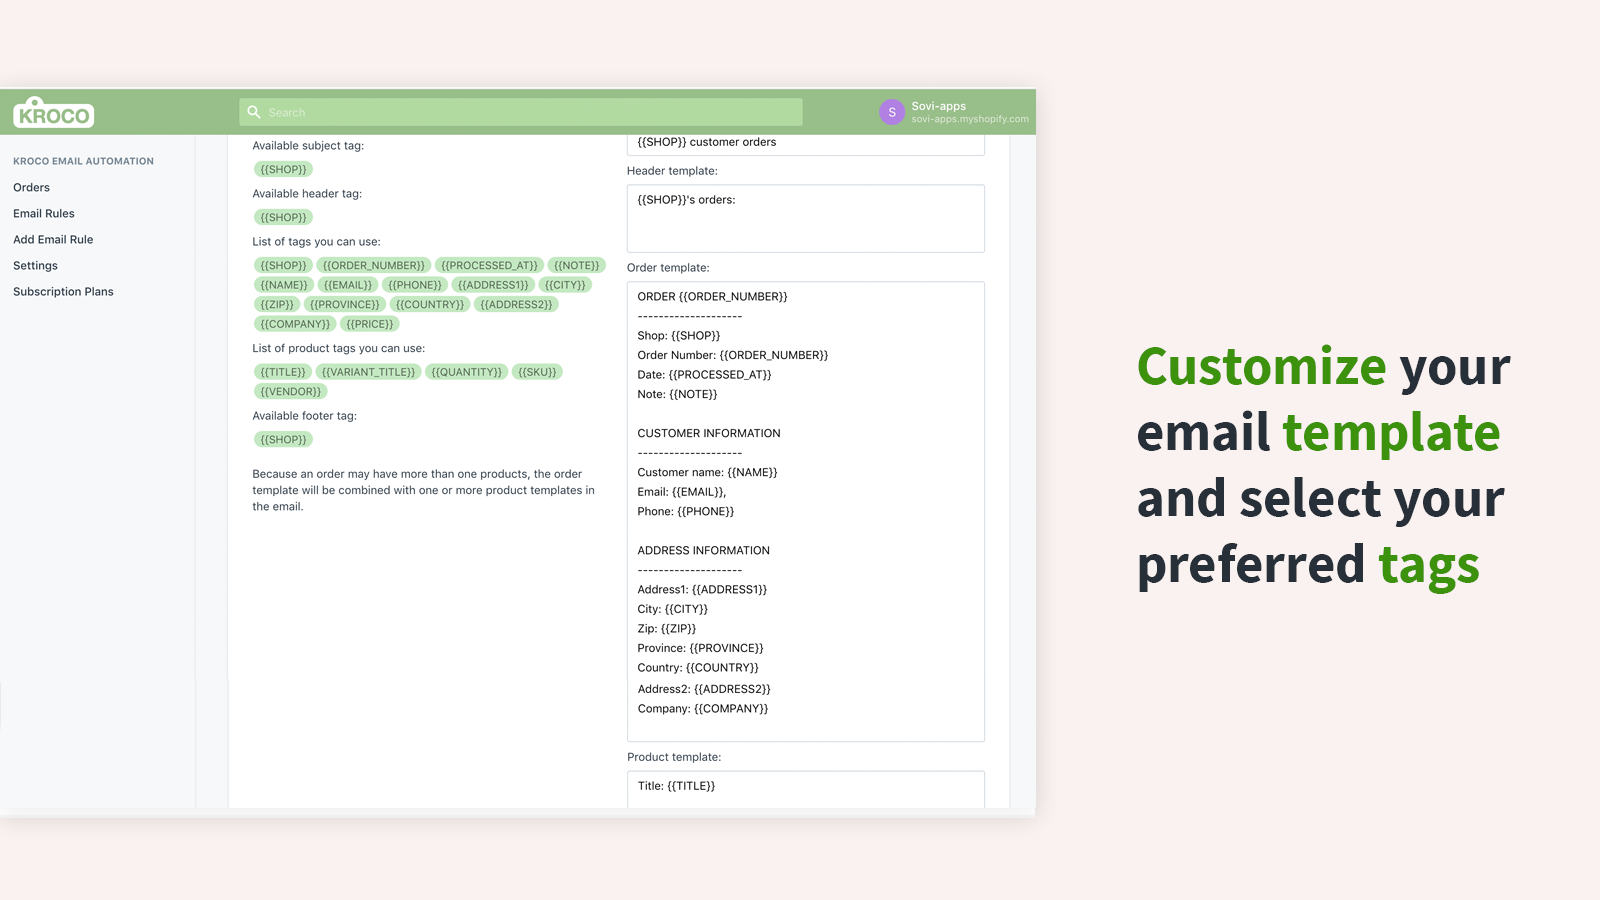 Customize your email template and select your preferred tags